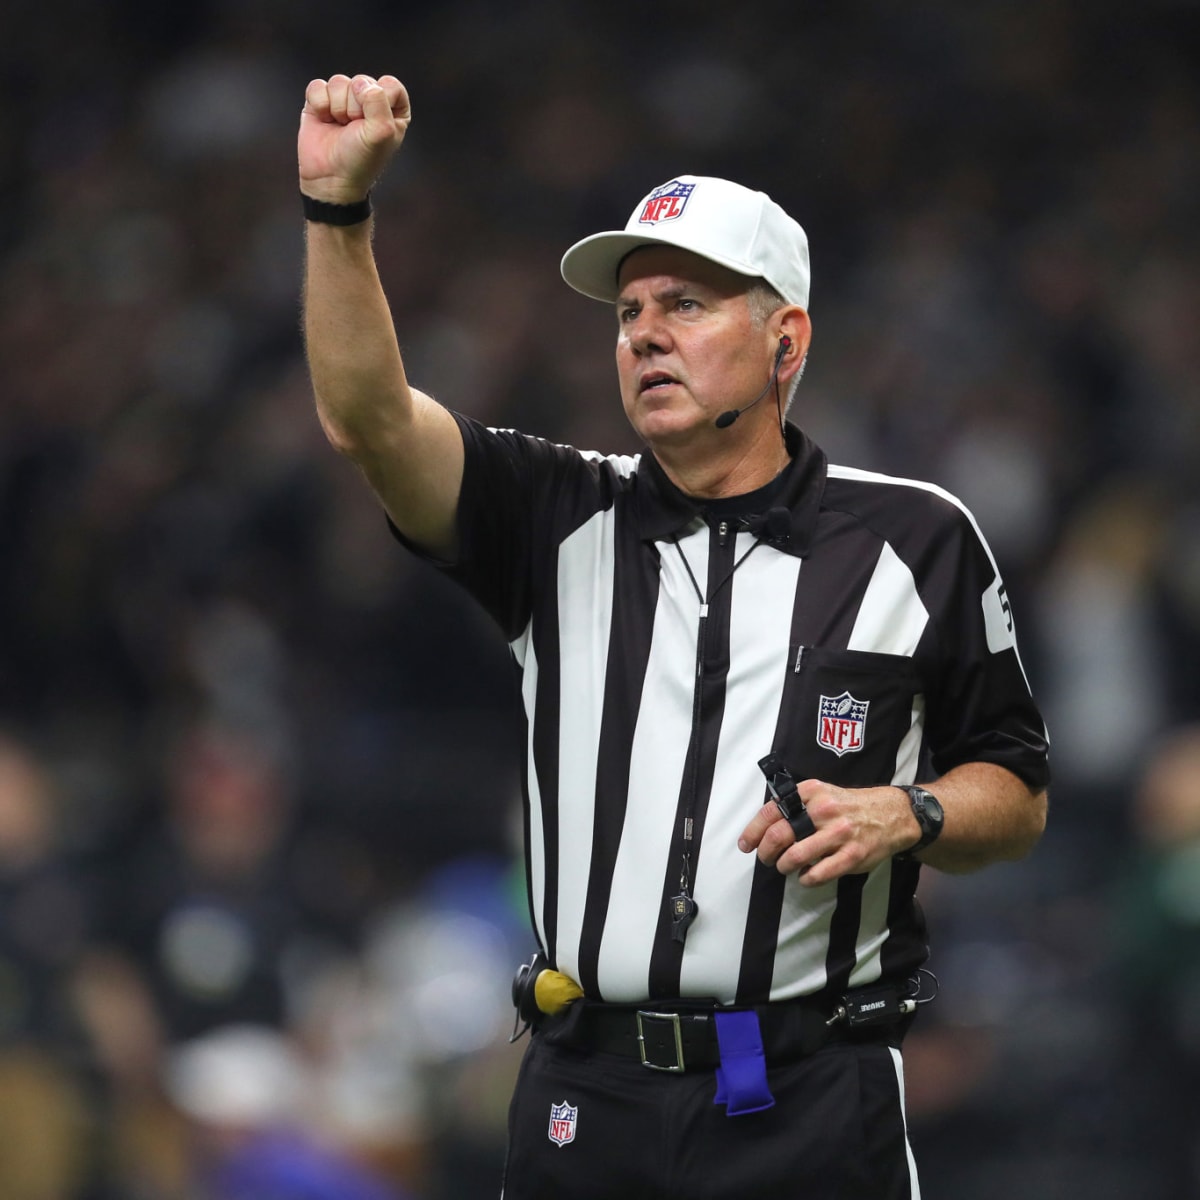 Referee Clarifies Re-Played Third Down in AFC Championship Game